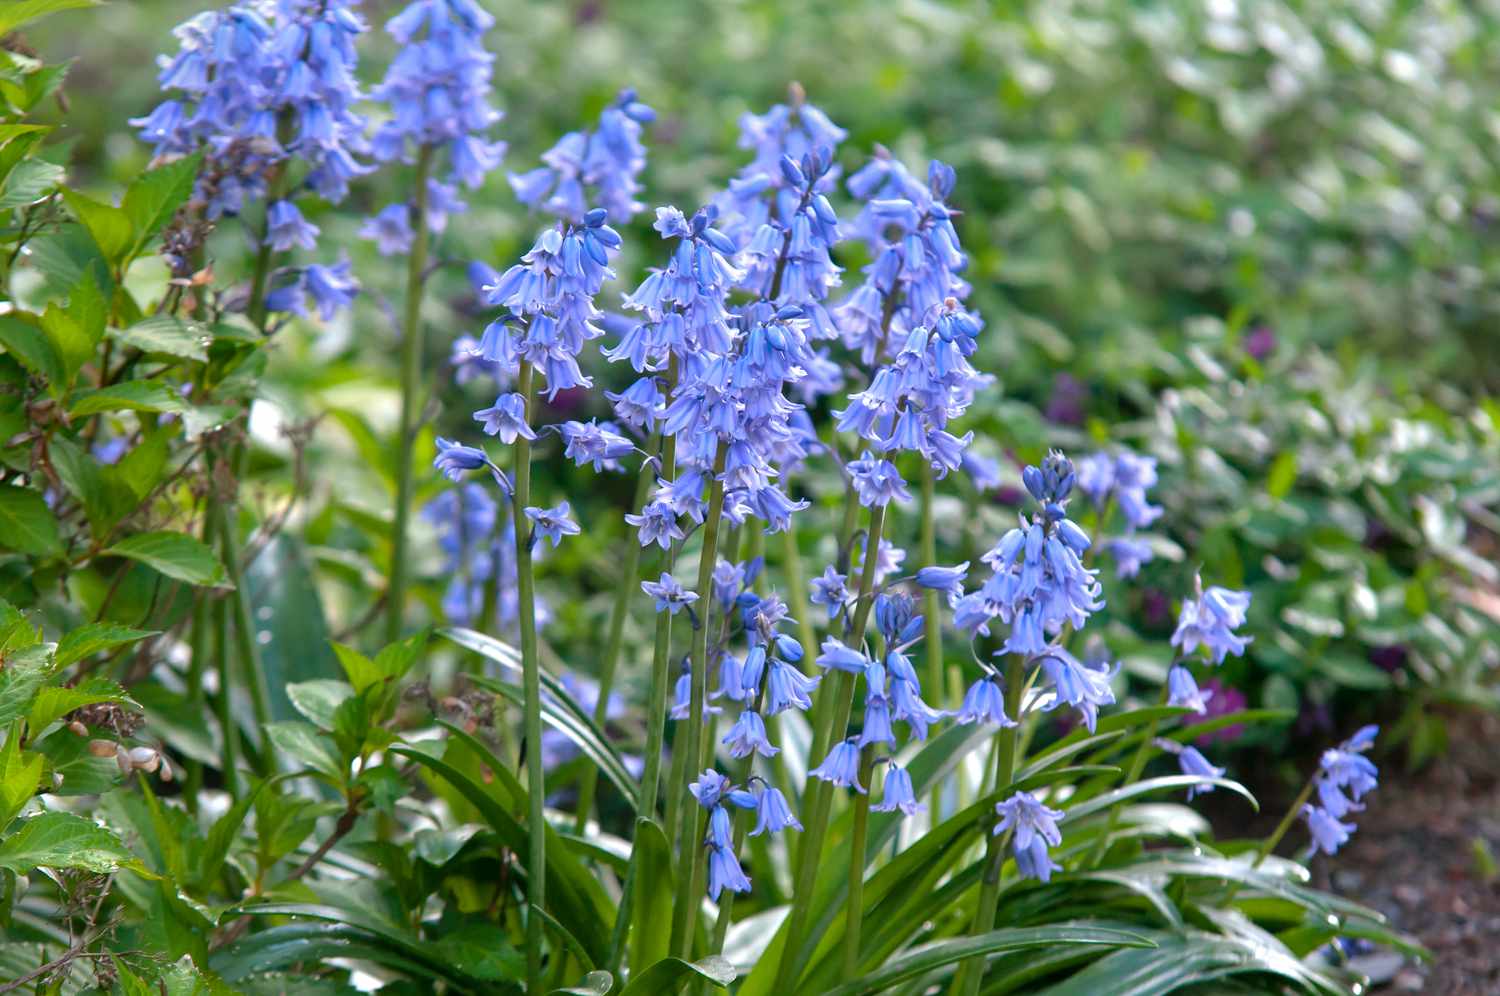 Spanish bluebell plant with blue flowers in garden